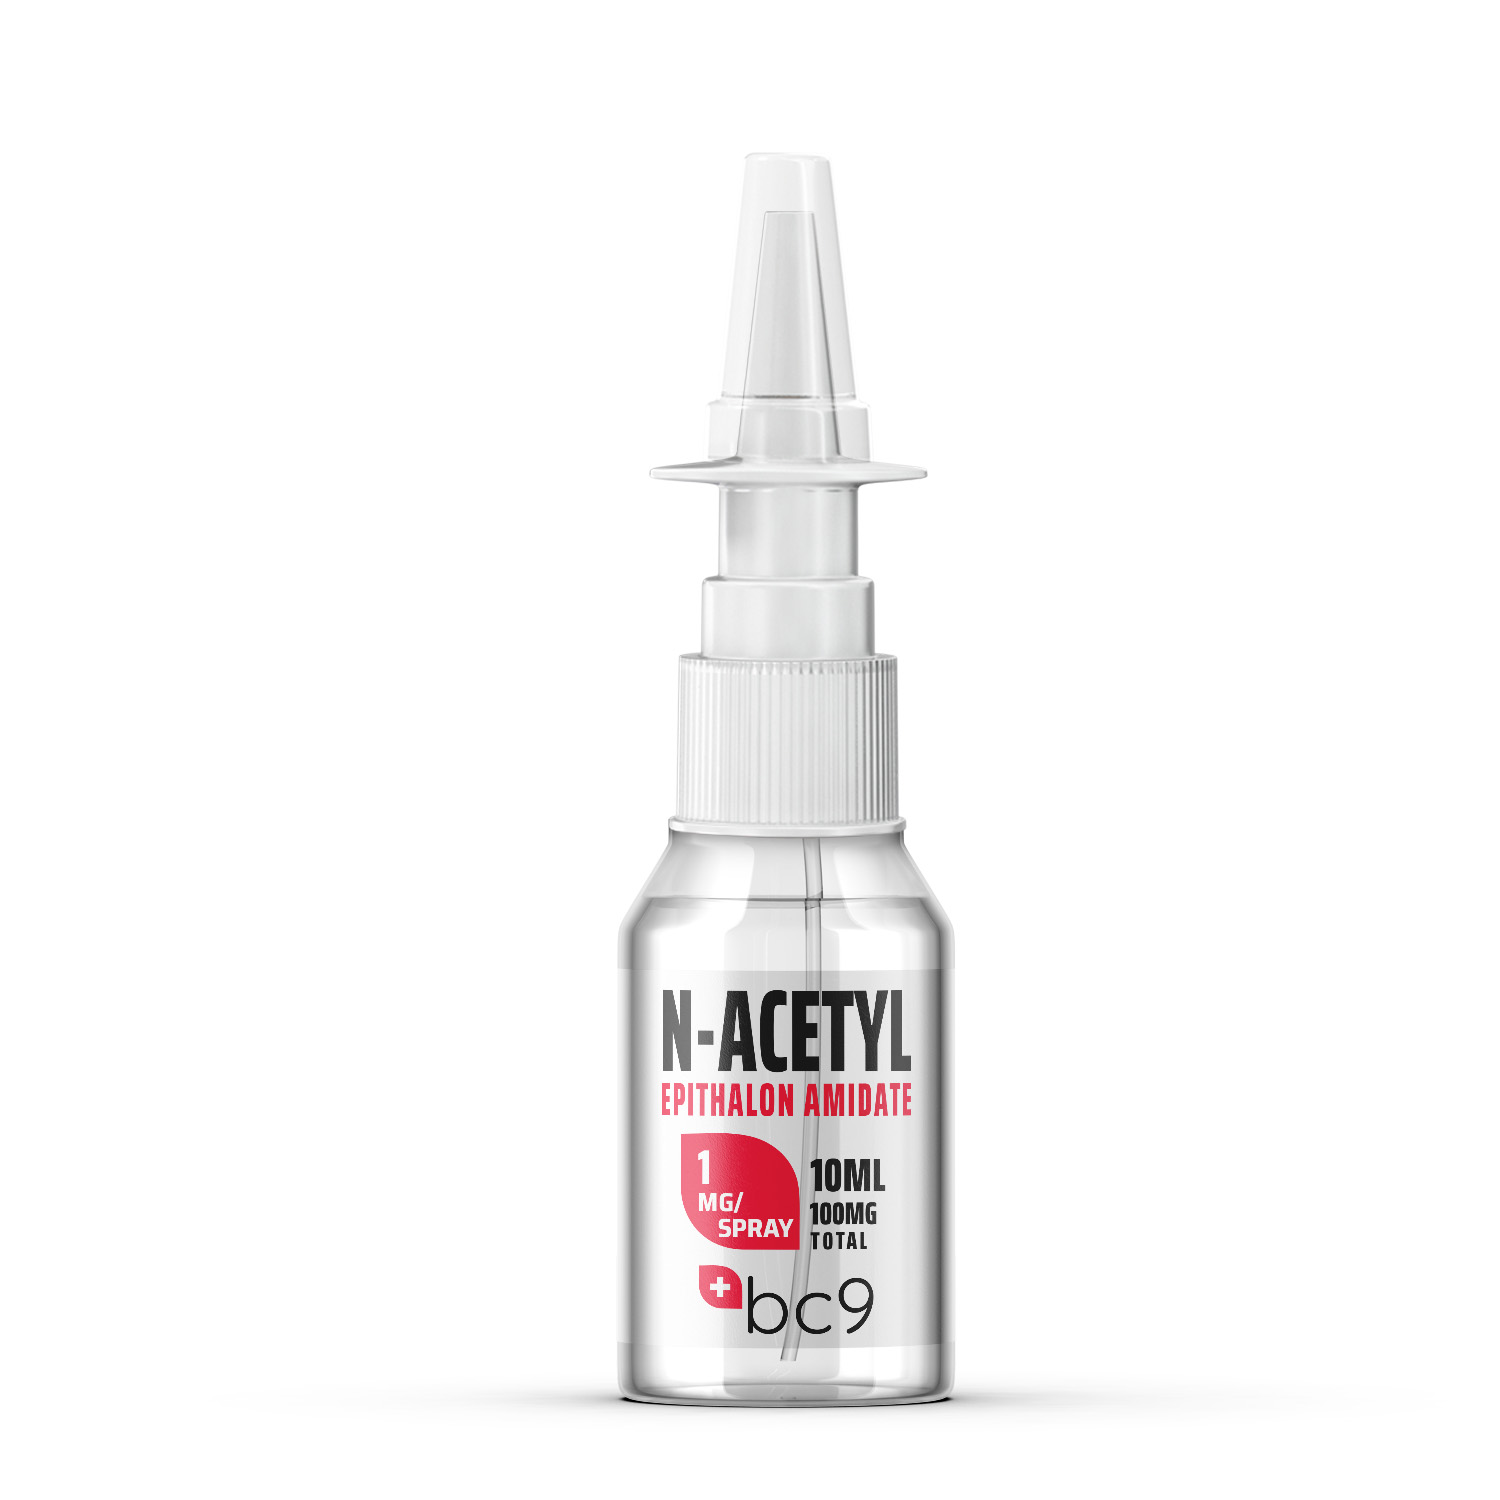 N-Acetyl Epithalon Amidate Nasal Spray For Sale | BC9.org